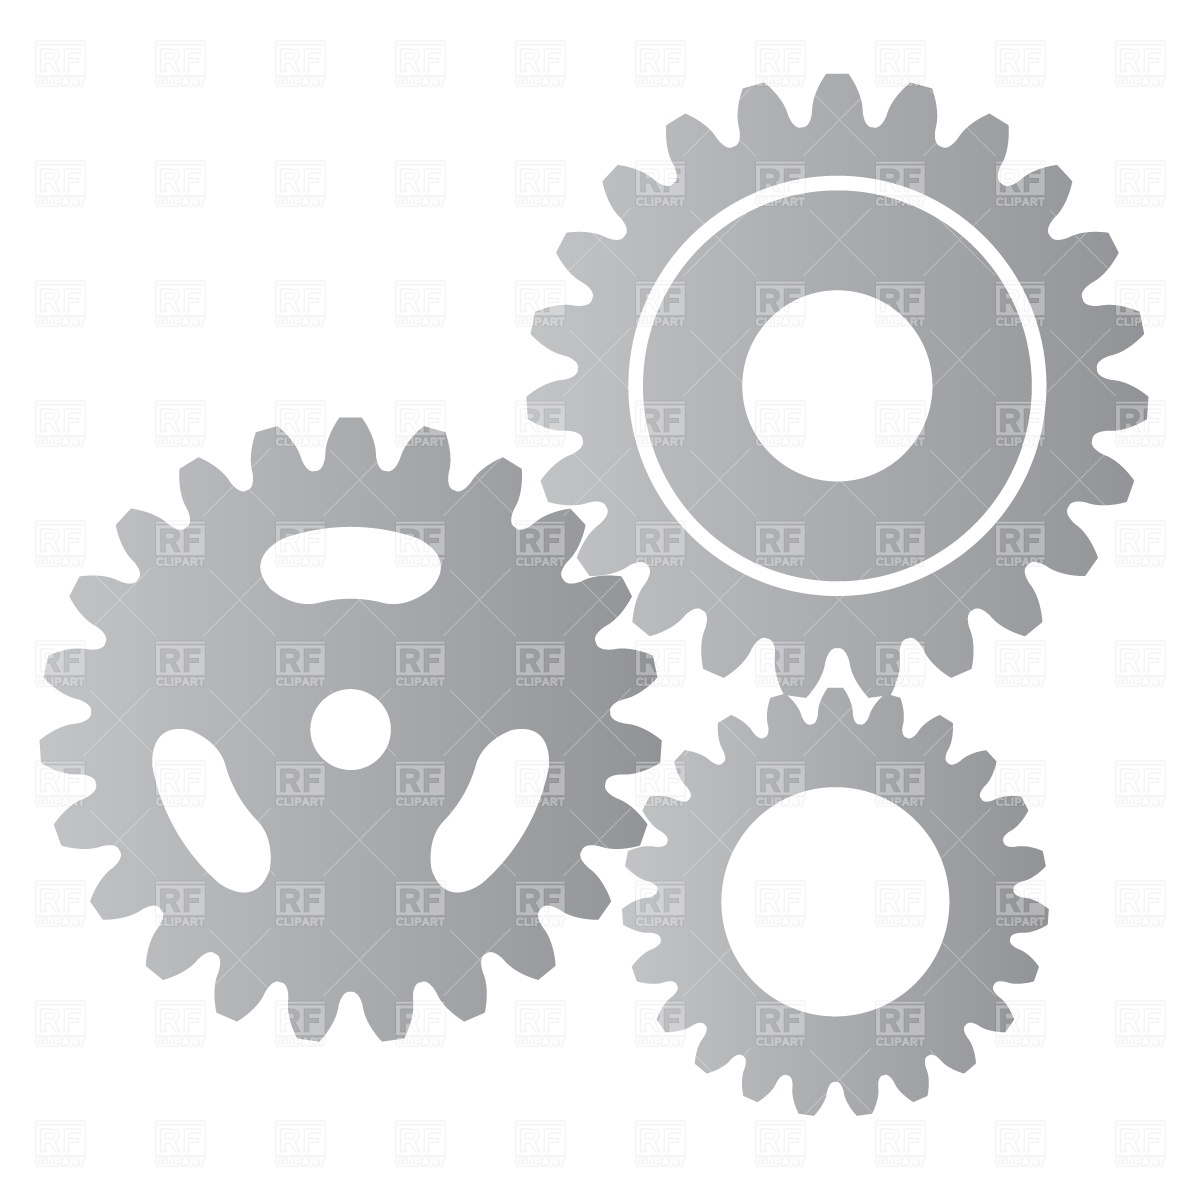     Machinery 646 Objects Download Royalty Free Vector Clip Art  Eps